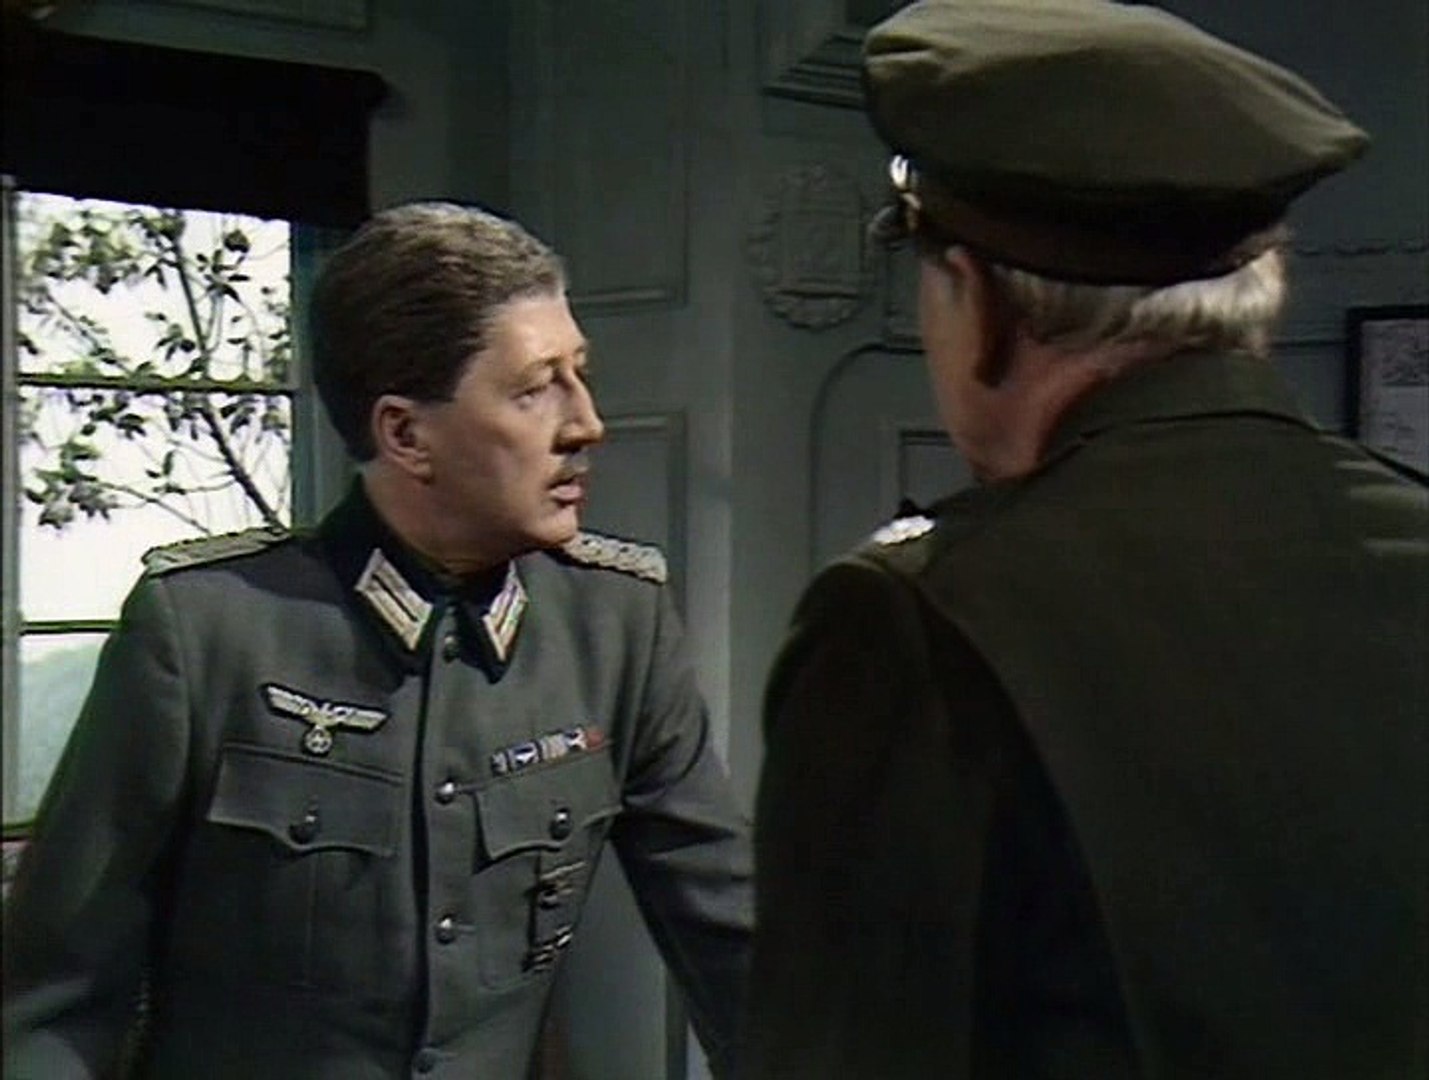 Colditz - TV Series S1, Ep13 - The Way Out